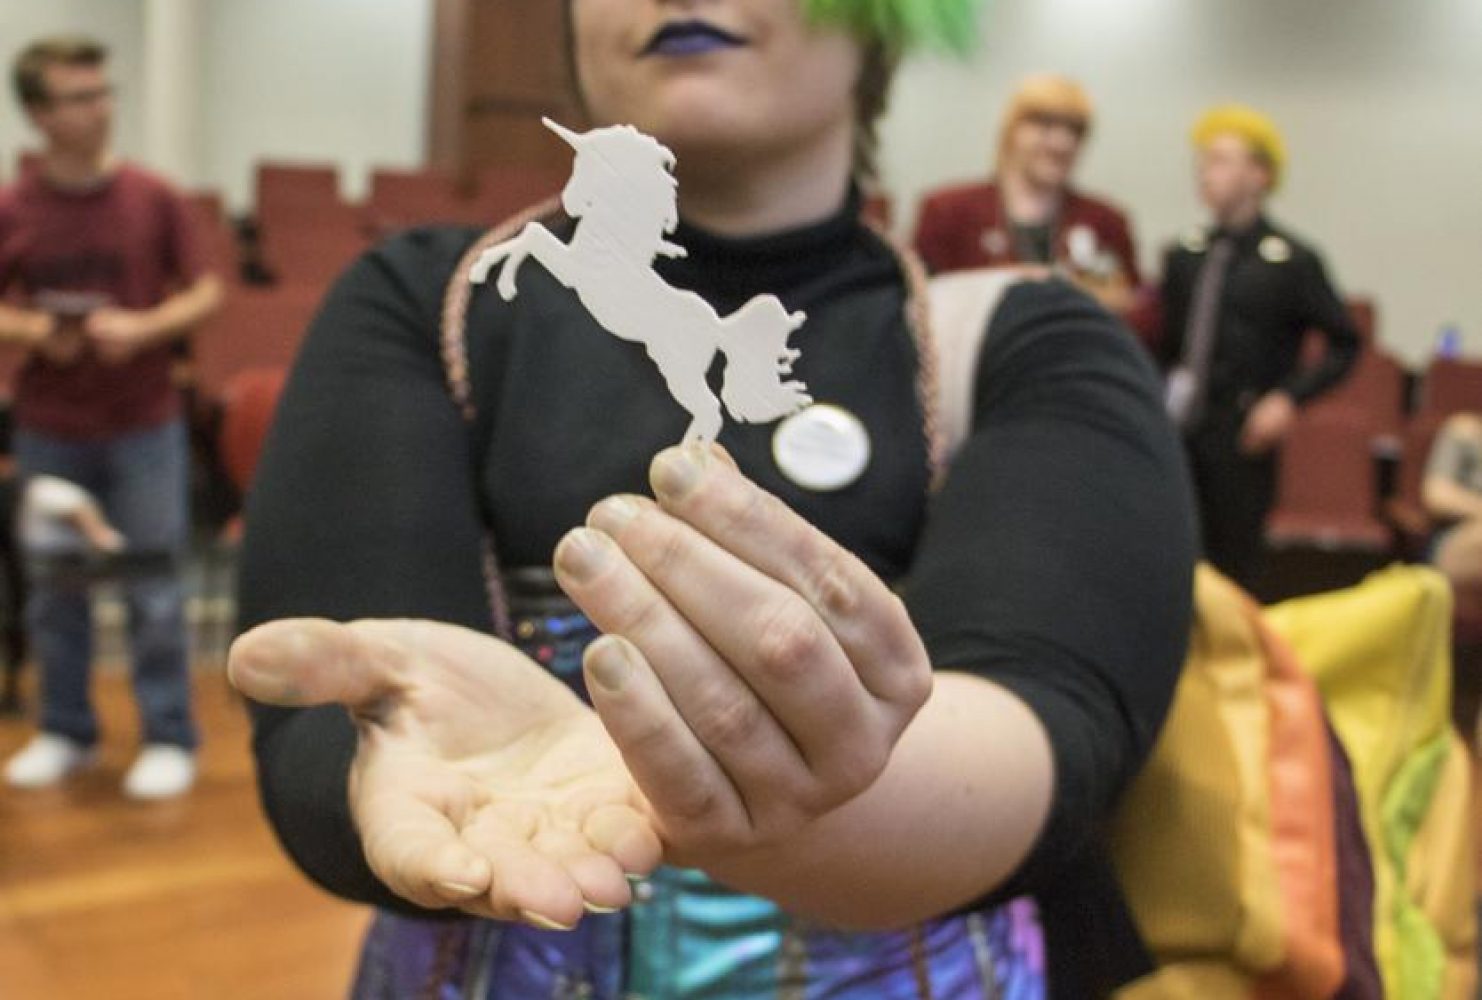 Graduate Jareth Ryford shows off their unicorn pin, 3-D printed for the event by the Design Hub, on May 3, 2019. (Photo by Ashley Hayes-Stone)